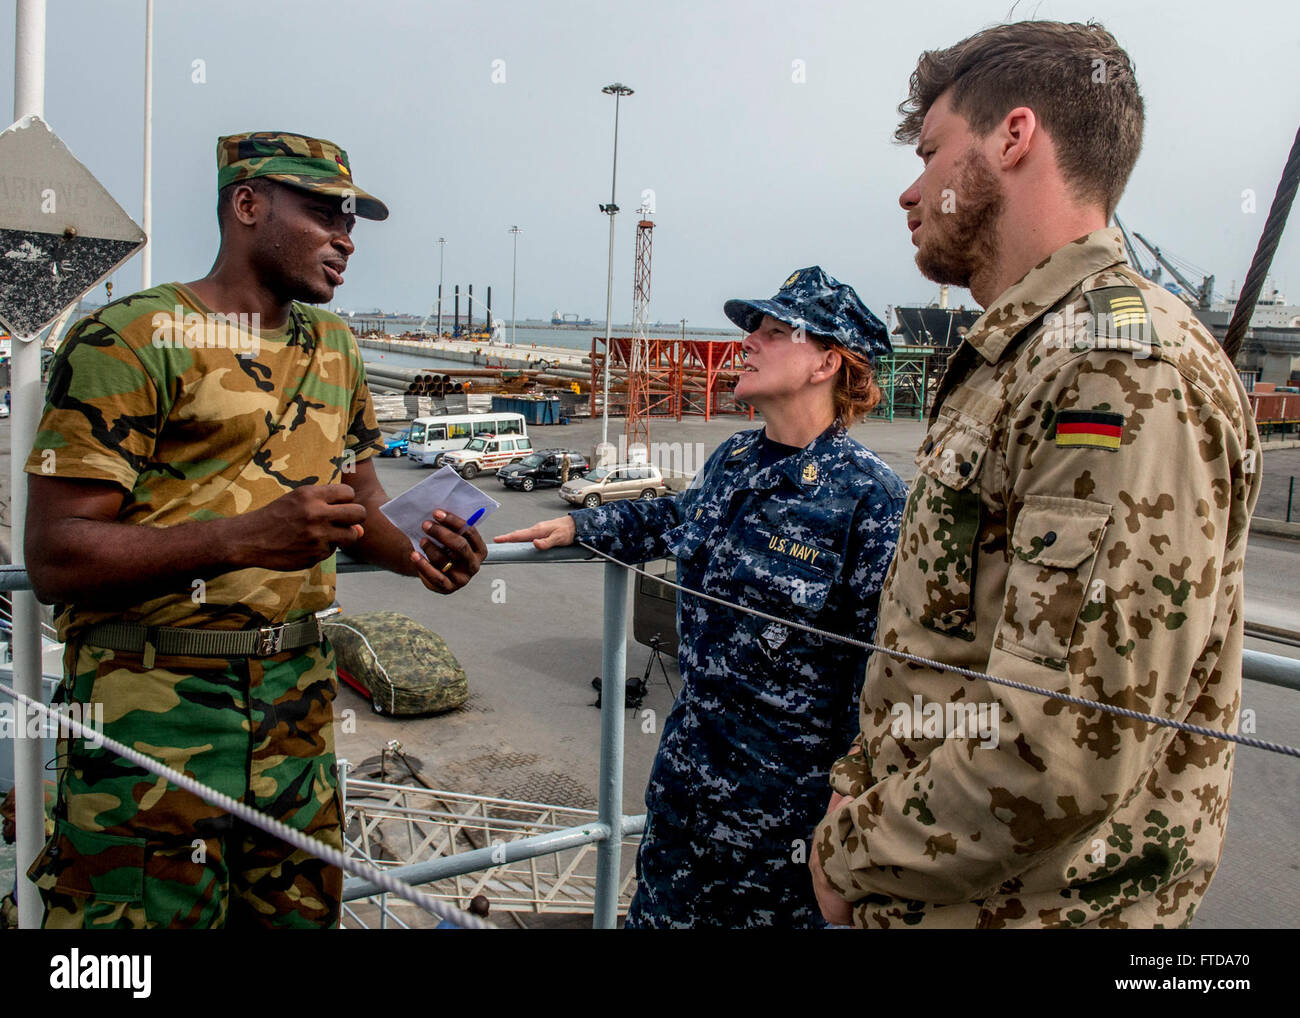 150318-N-EZ054-169 TEMA, Ghana (March 18, 2015) Ghana air force Master Sgt. Elvis Gauch, left,  speaks with Chief Hospital Corpsman Allison Levy, from Bradenton, Fla., center,and a German navy sailor regarding medical procedures and techniques during a visit, board, search and seizure training evolution during Exercise Obangame Express 2015 aboard  GNS Bonsu March 18, 2015. Obangame Express 2015, sponsored by U.S. Africa Command (AFRICOM), is designed to improve regional cooperation, maritime domain awareness (MDA), information-sharing practices, and tactical interdiction expertise to enhance  Stock Photo